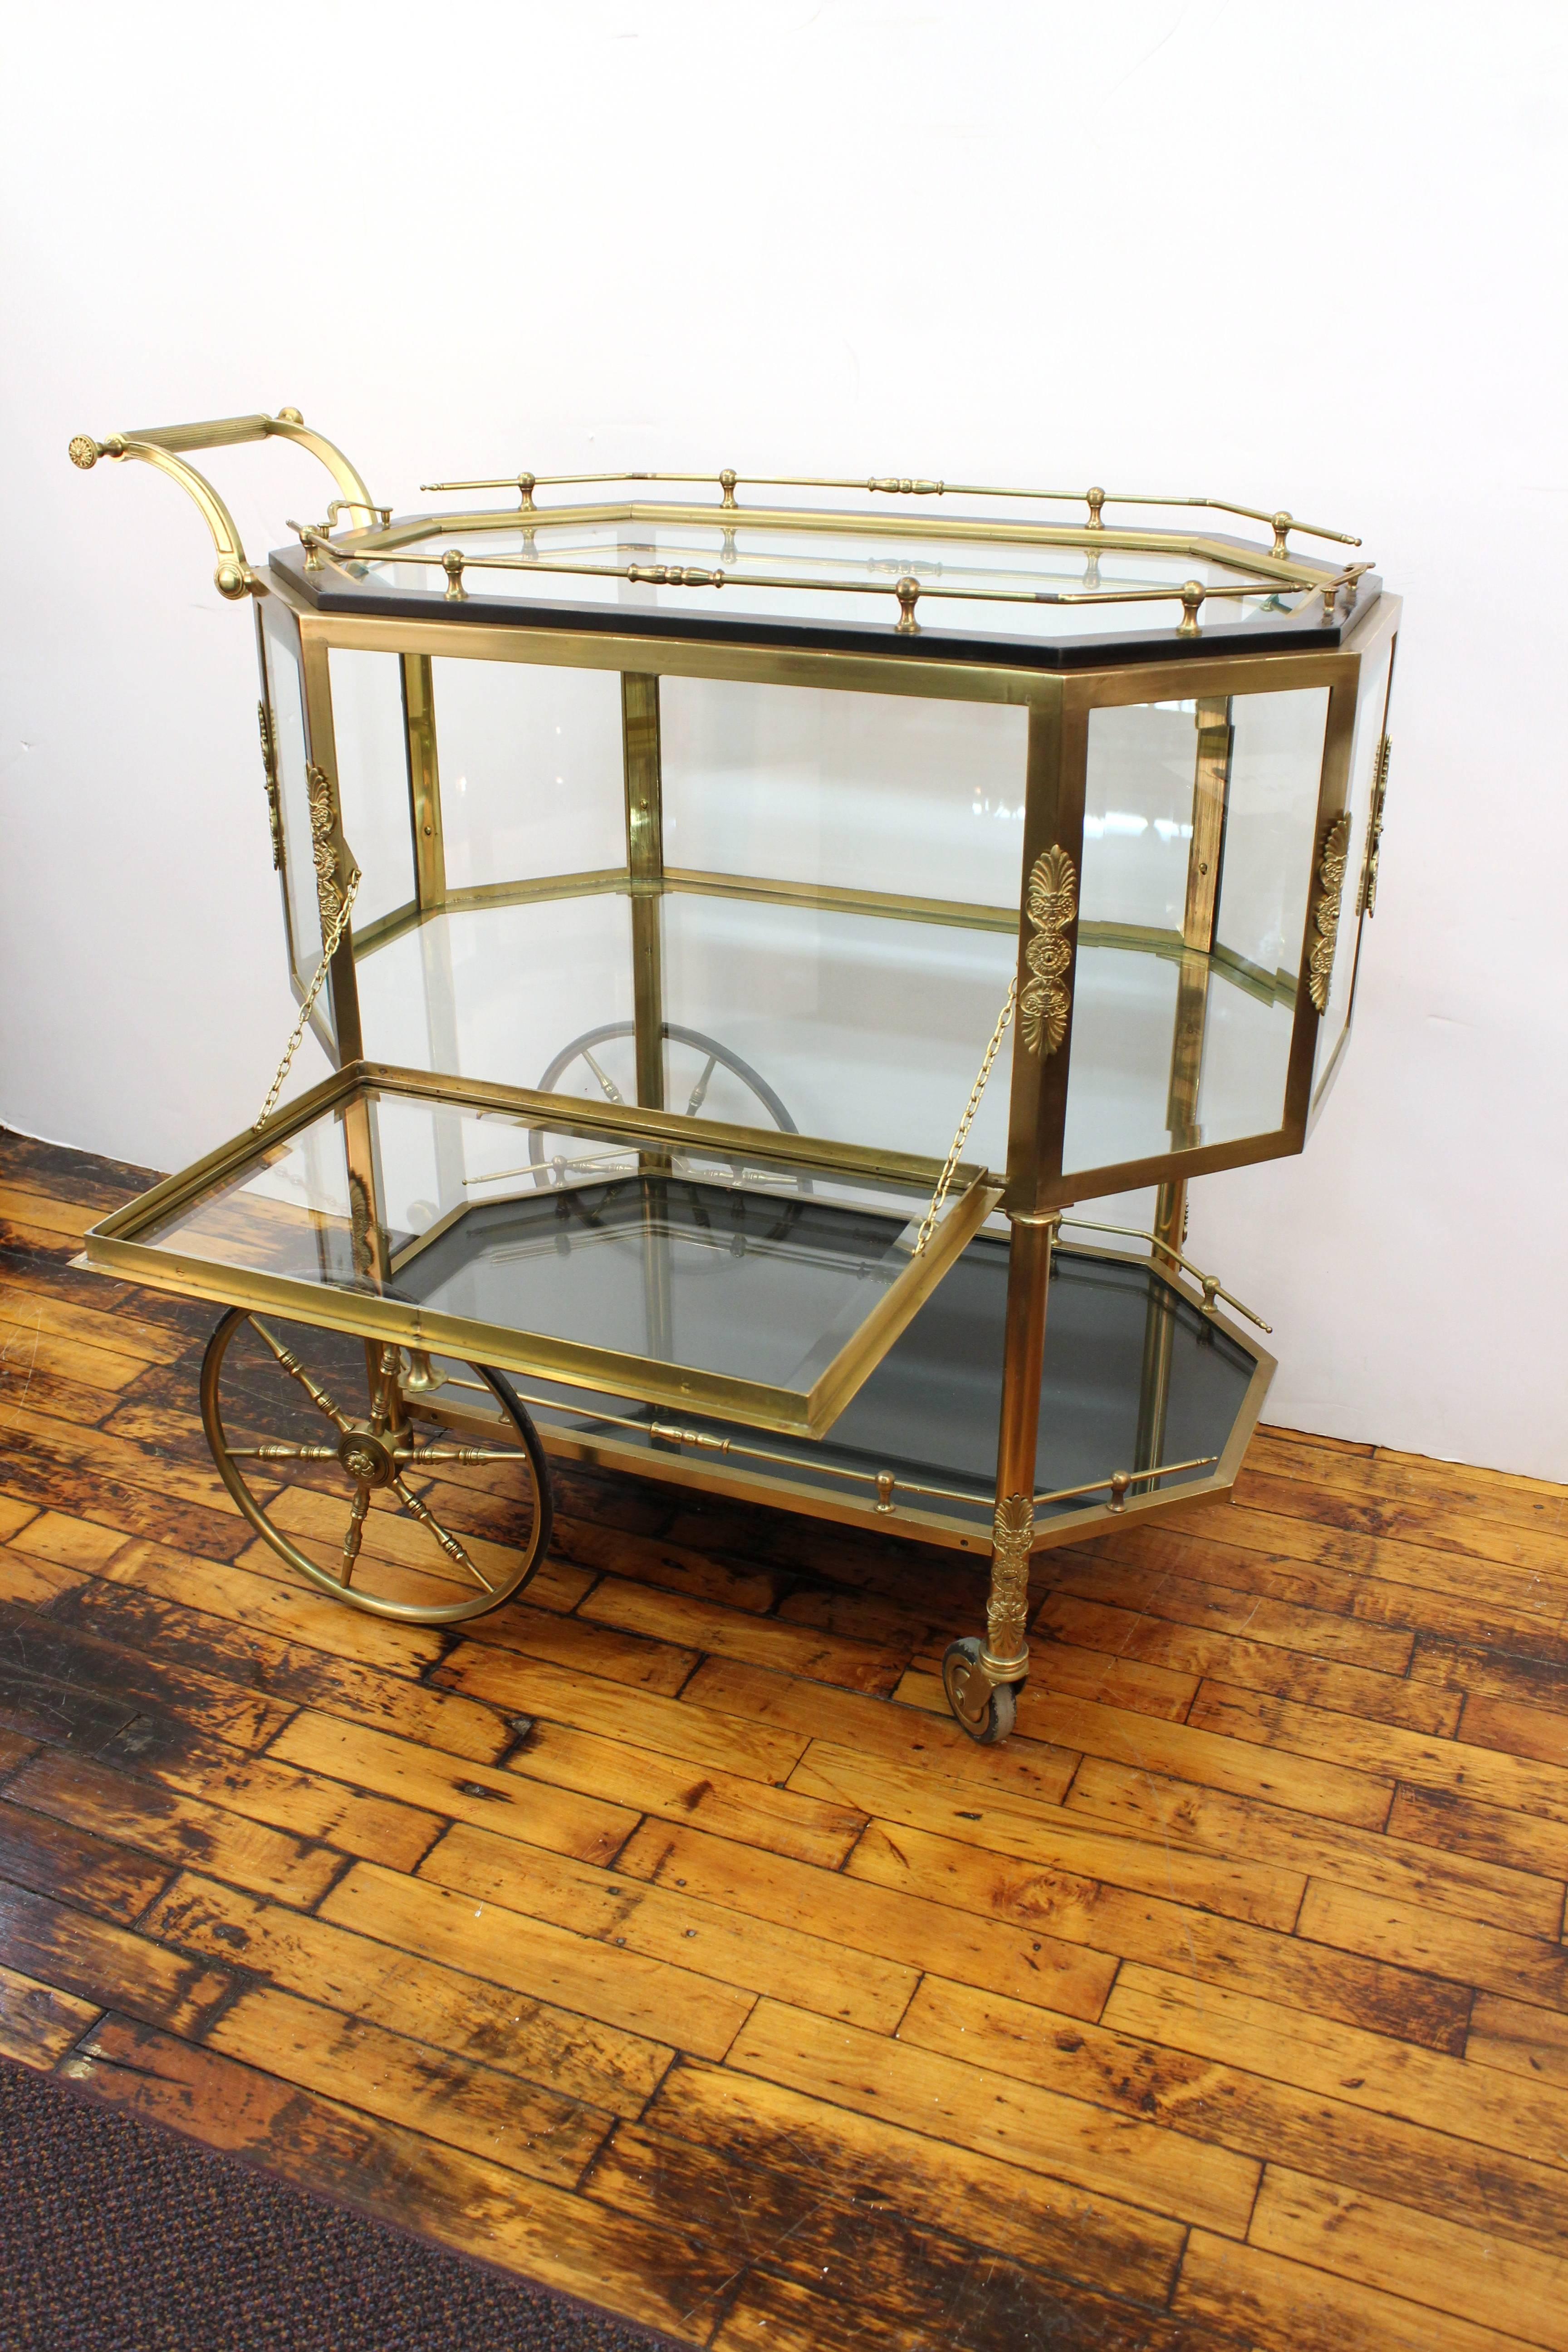 A French brass, glass and wood pastry cart or tea trolley, made in the 1940s in a neoclassical revival style. The trolley has a removable glass tray top and an enclosed shelf for pastries. The upper and lower shelves are gallery-enclosed. Decorative